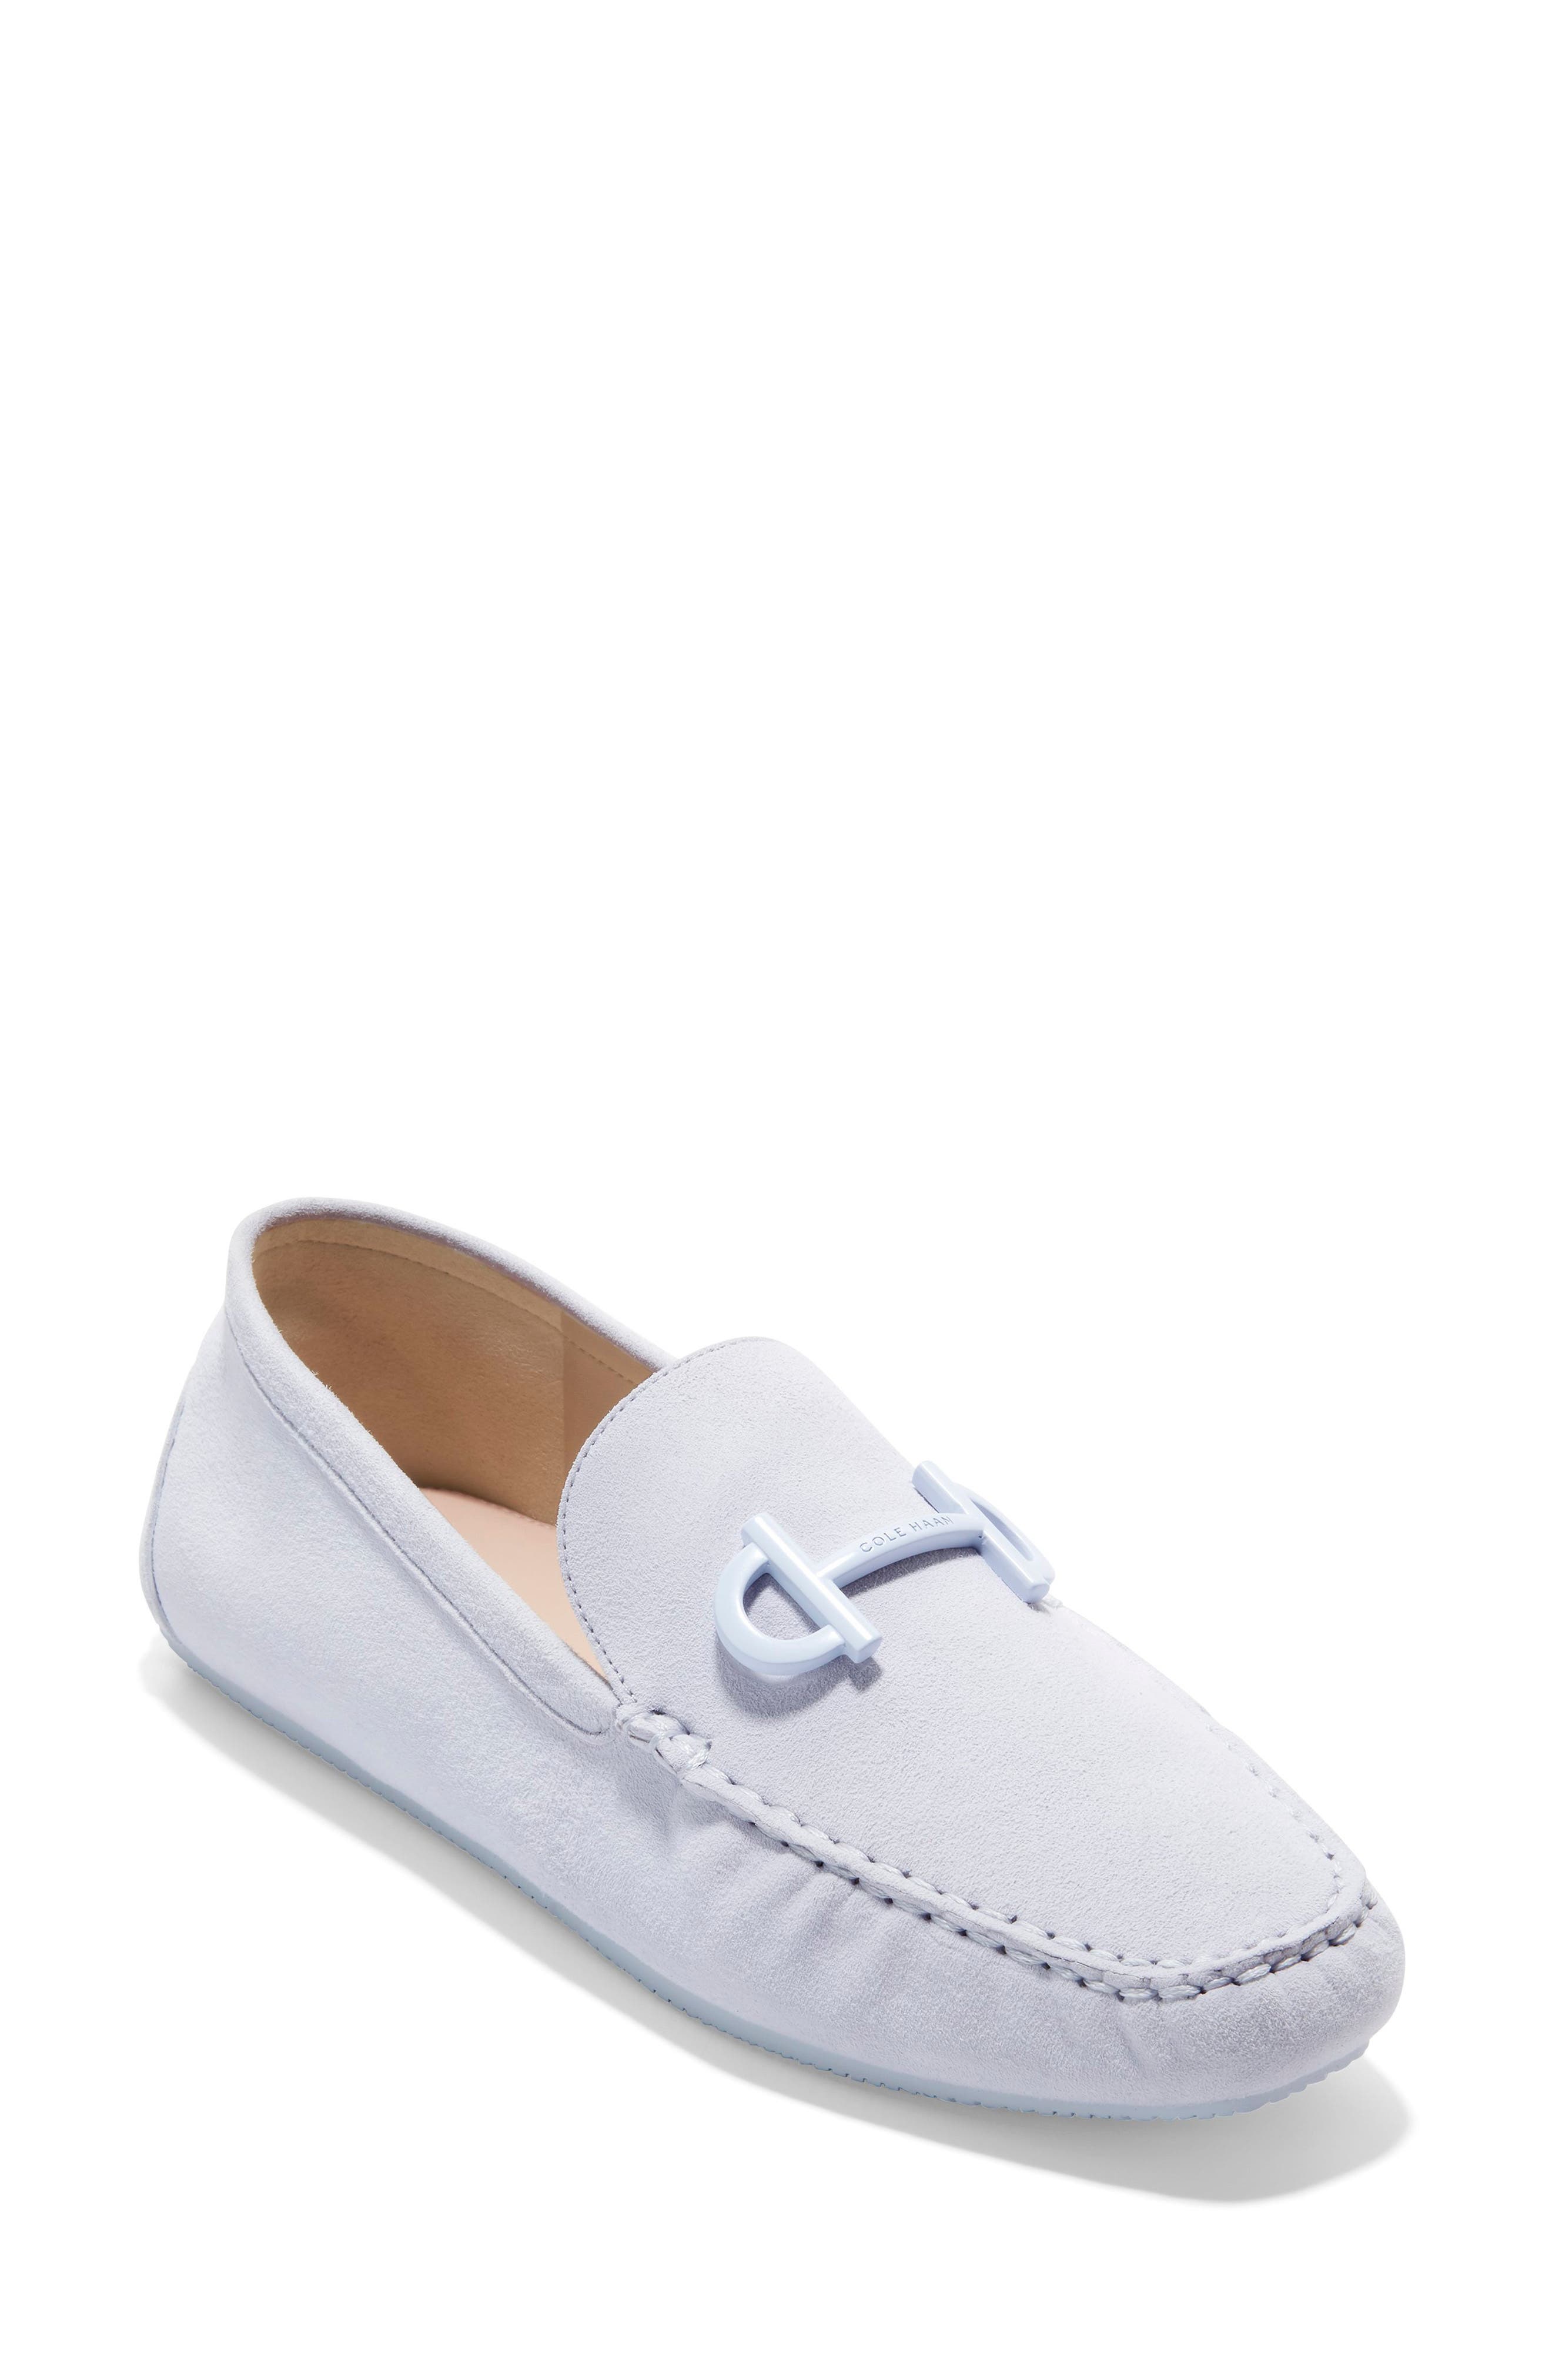 ASH Womens Enjoy Loafers Shoes